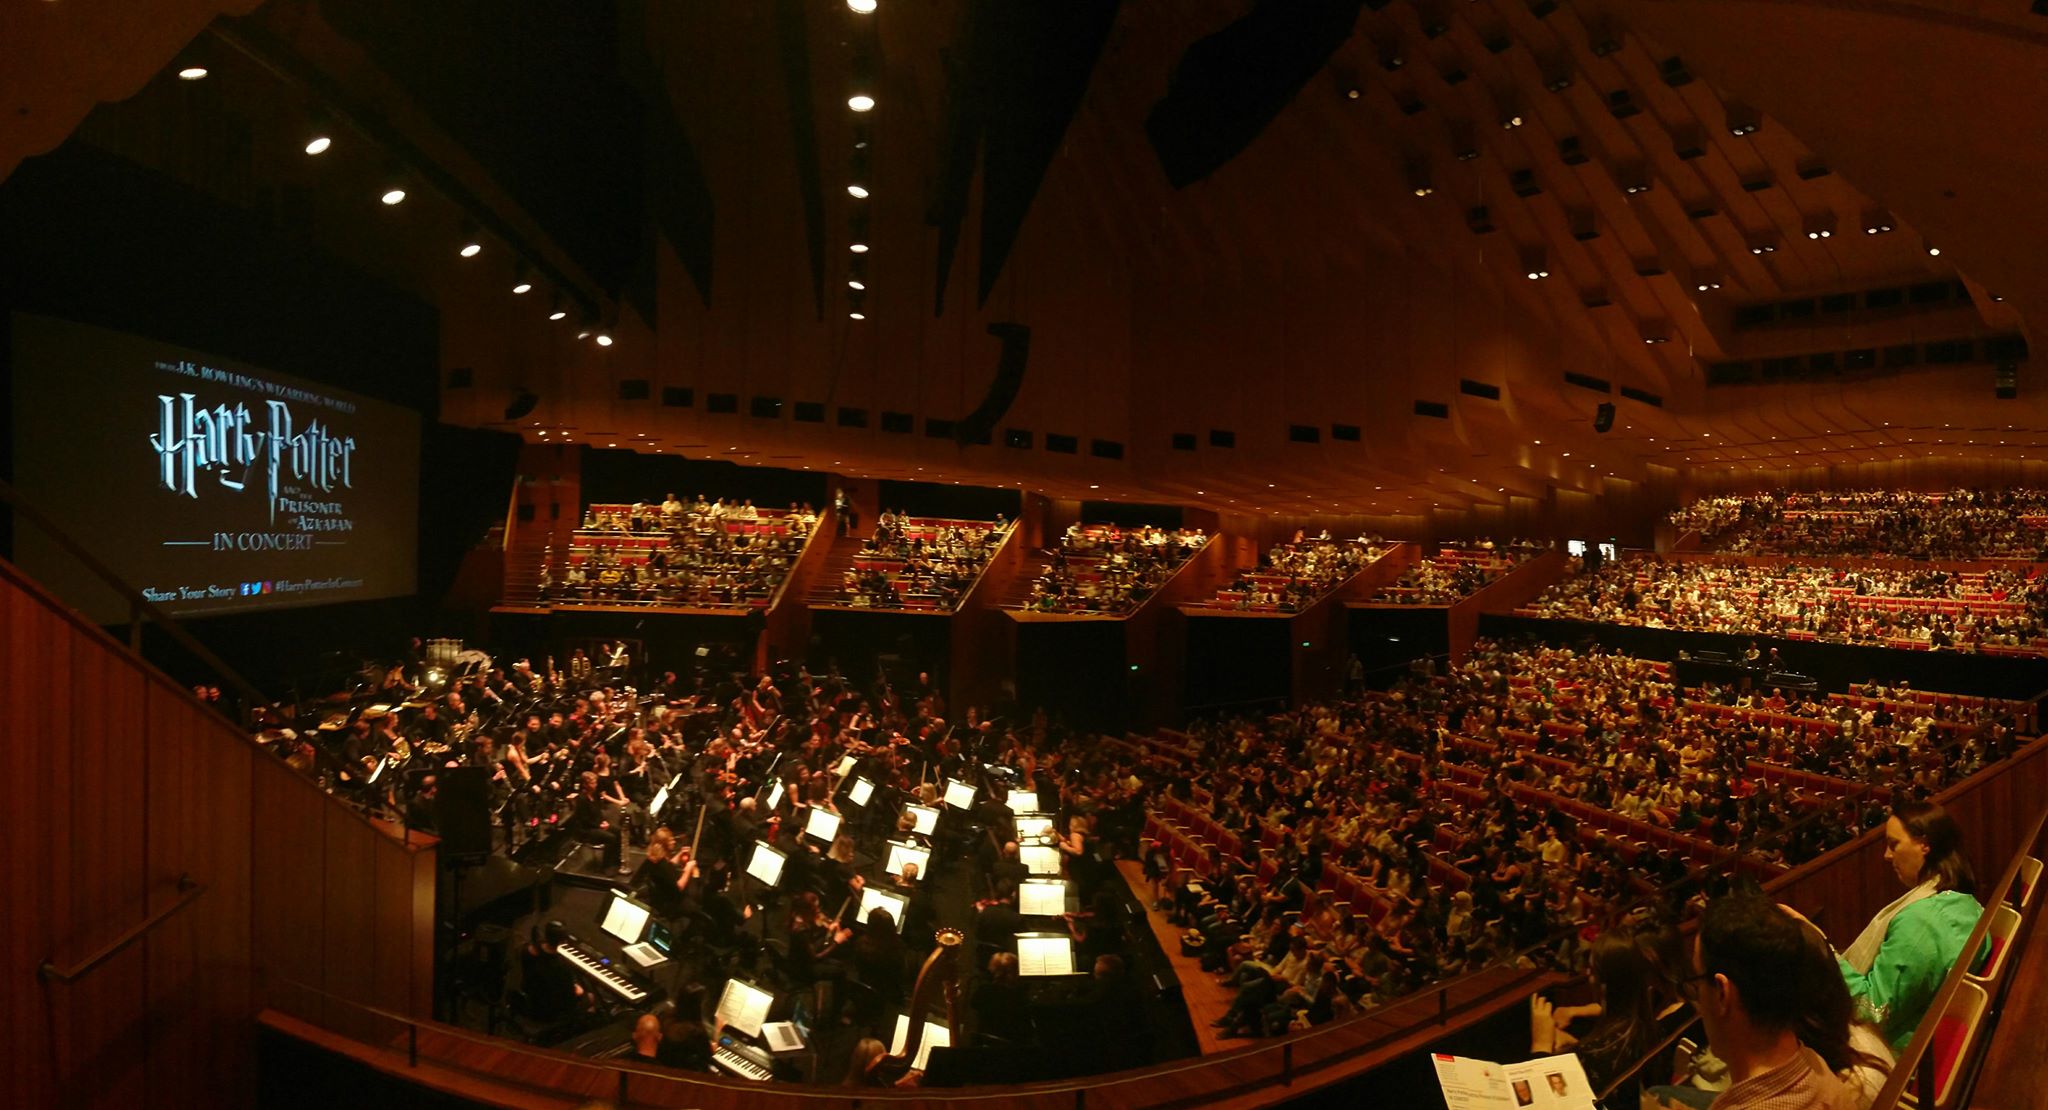 Harry Potter in concert, music and cinema, Fan, Wizarding world of harry potter, Sydney Symphony Orchestra 